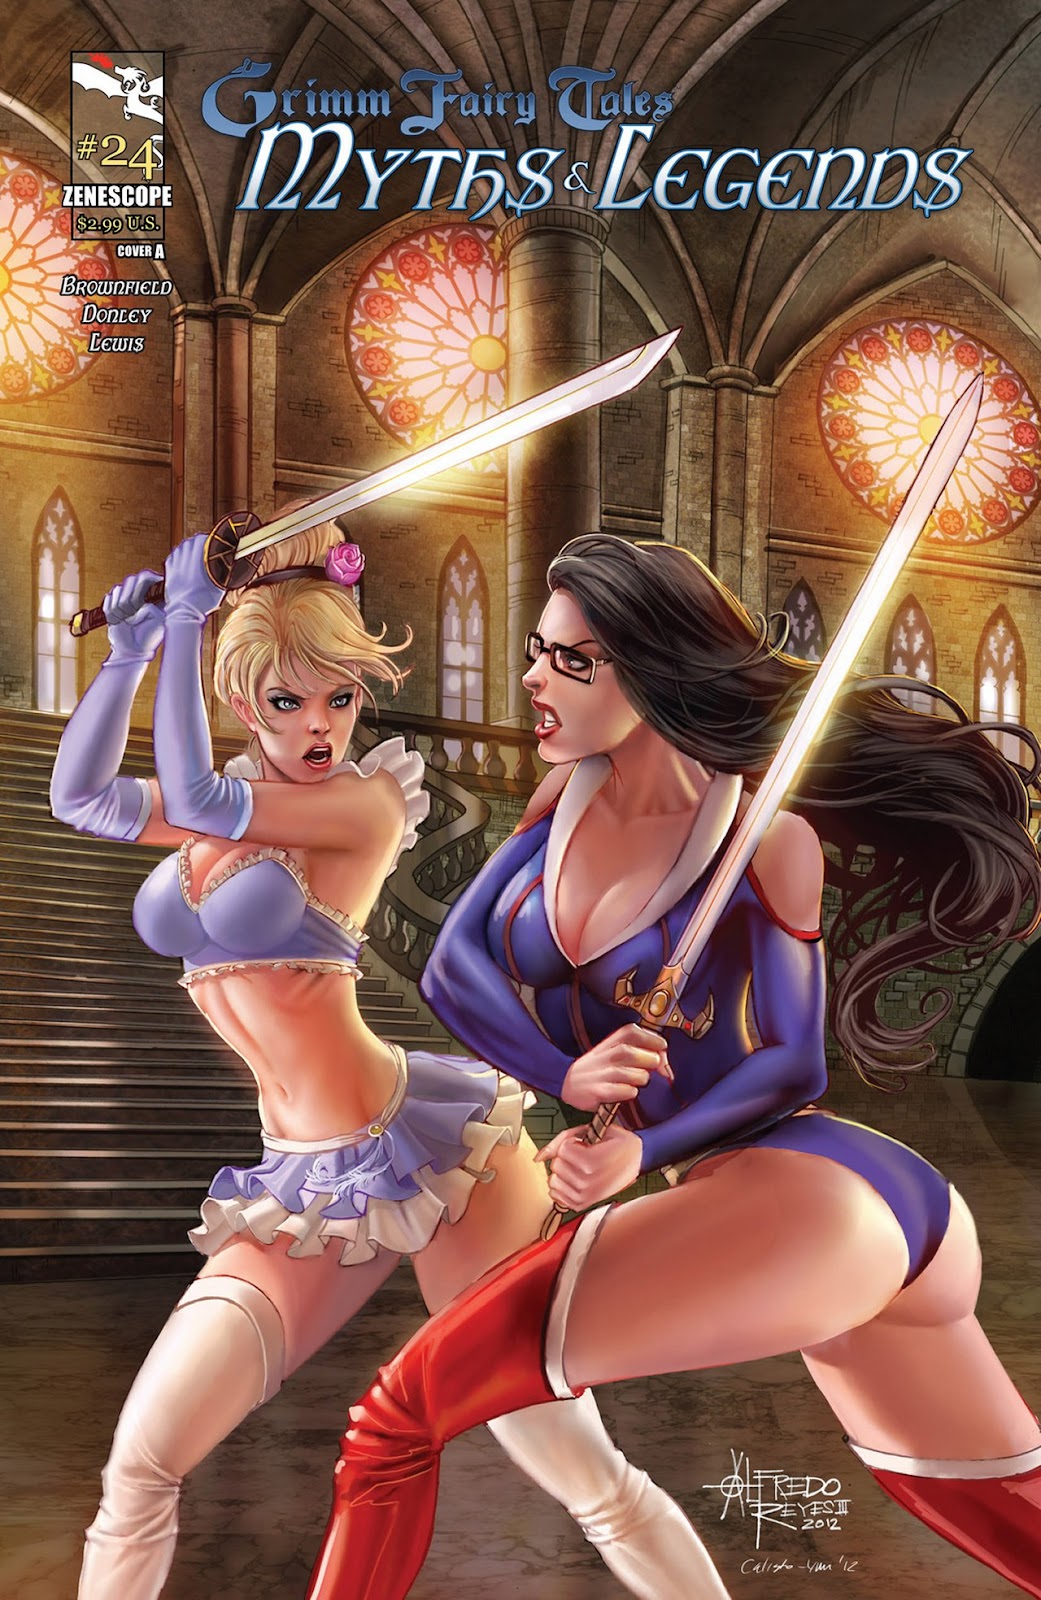 Grimm Fairy Tales: Myths & Legends issue 24 - Page 1